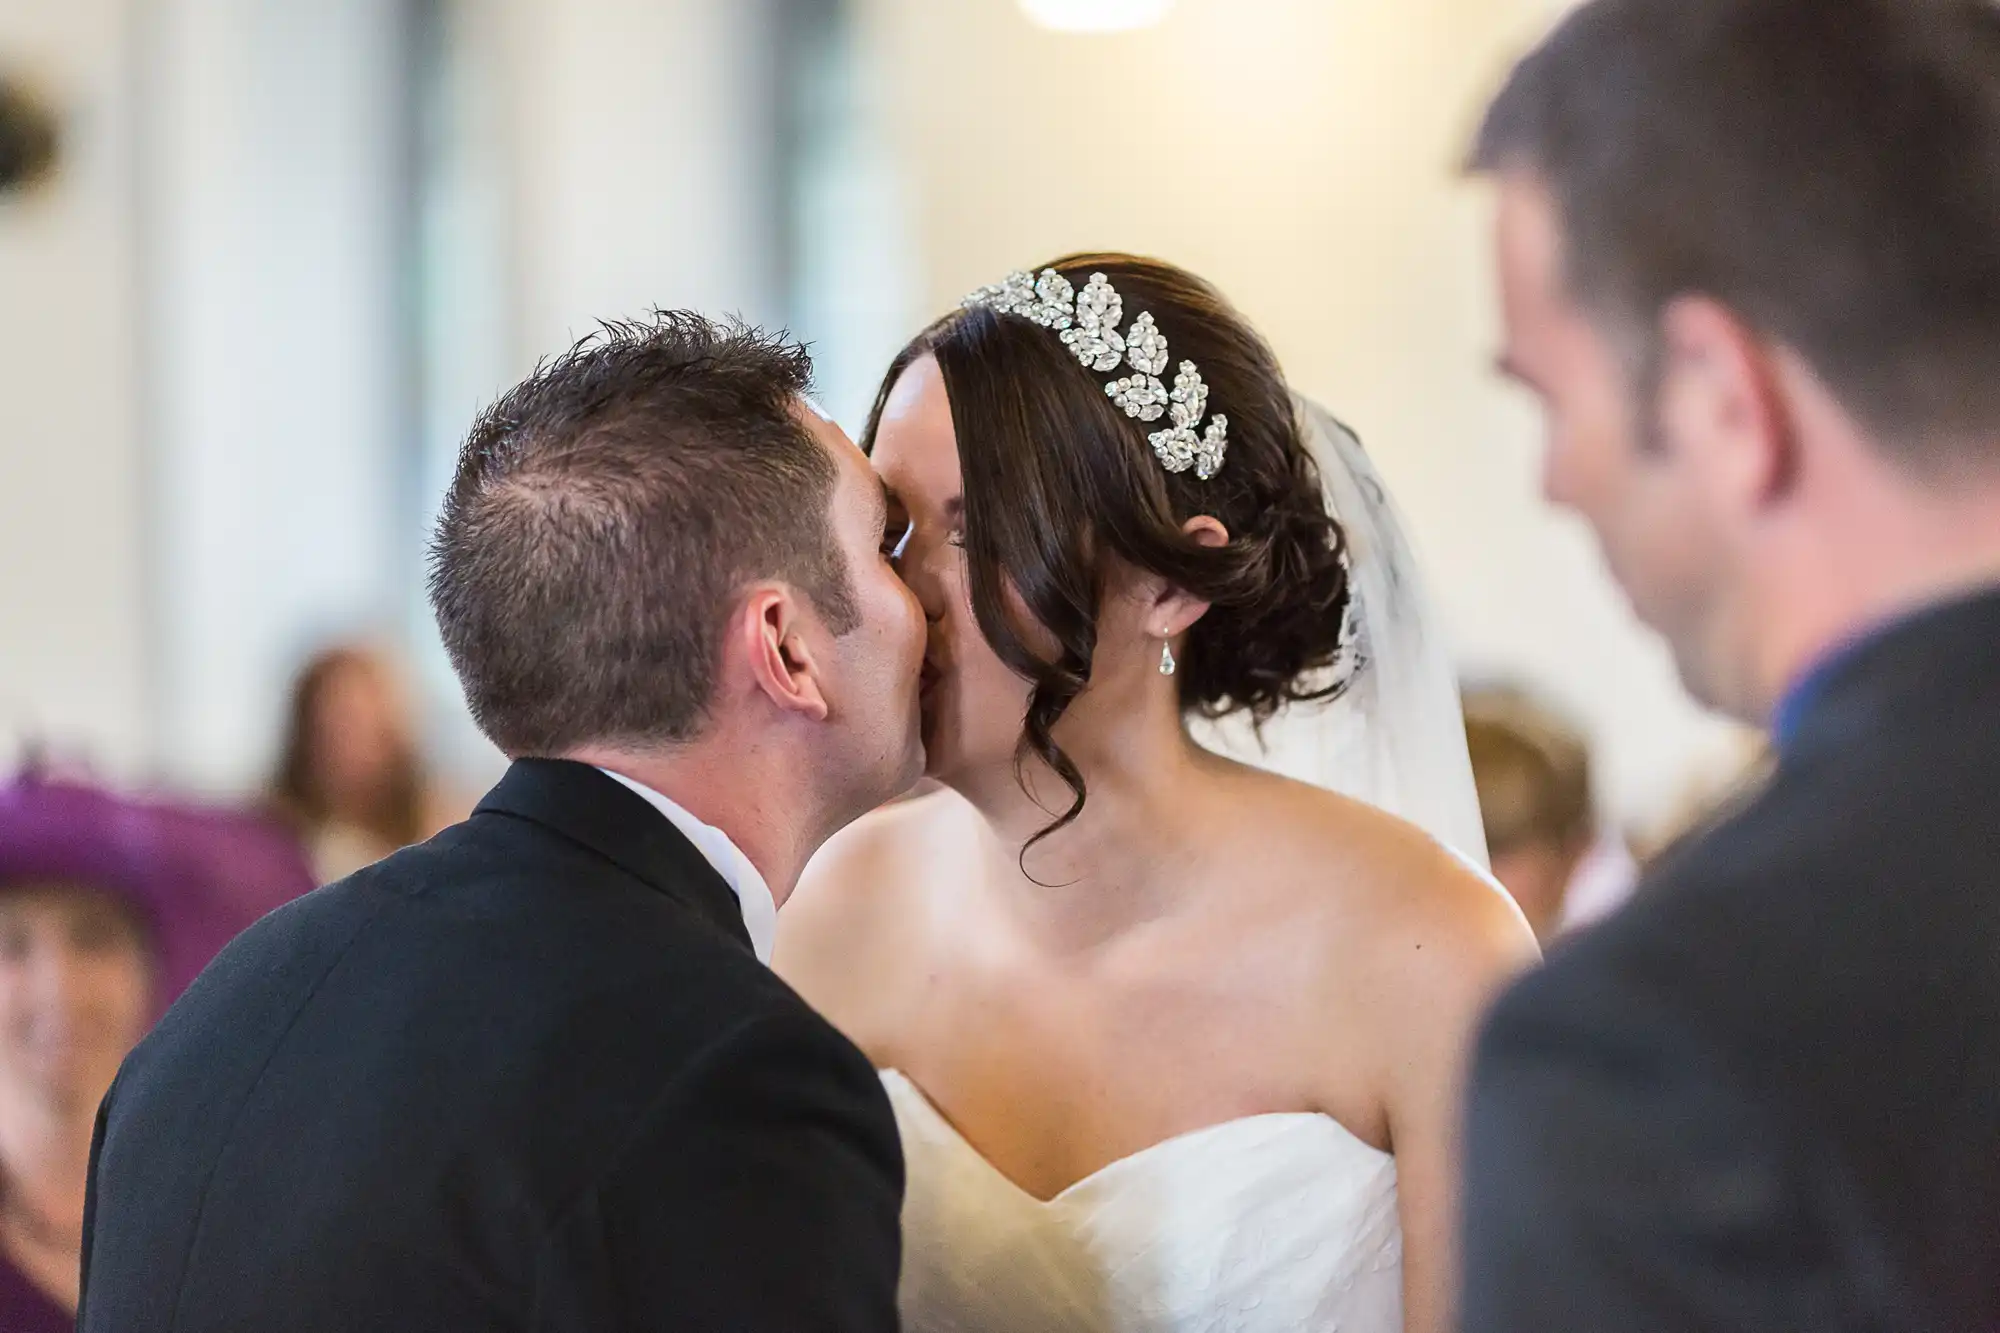 A bride and groom kissing during a wedding ceremony, with guests visible in the background.